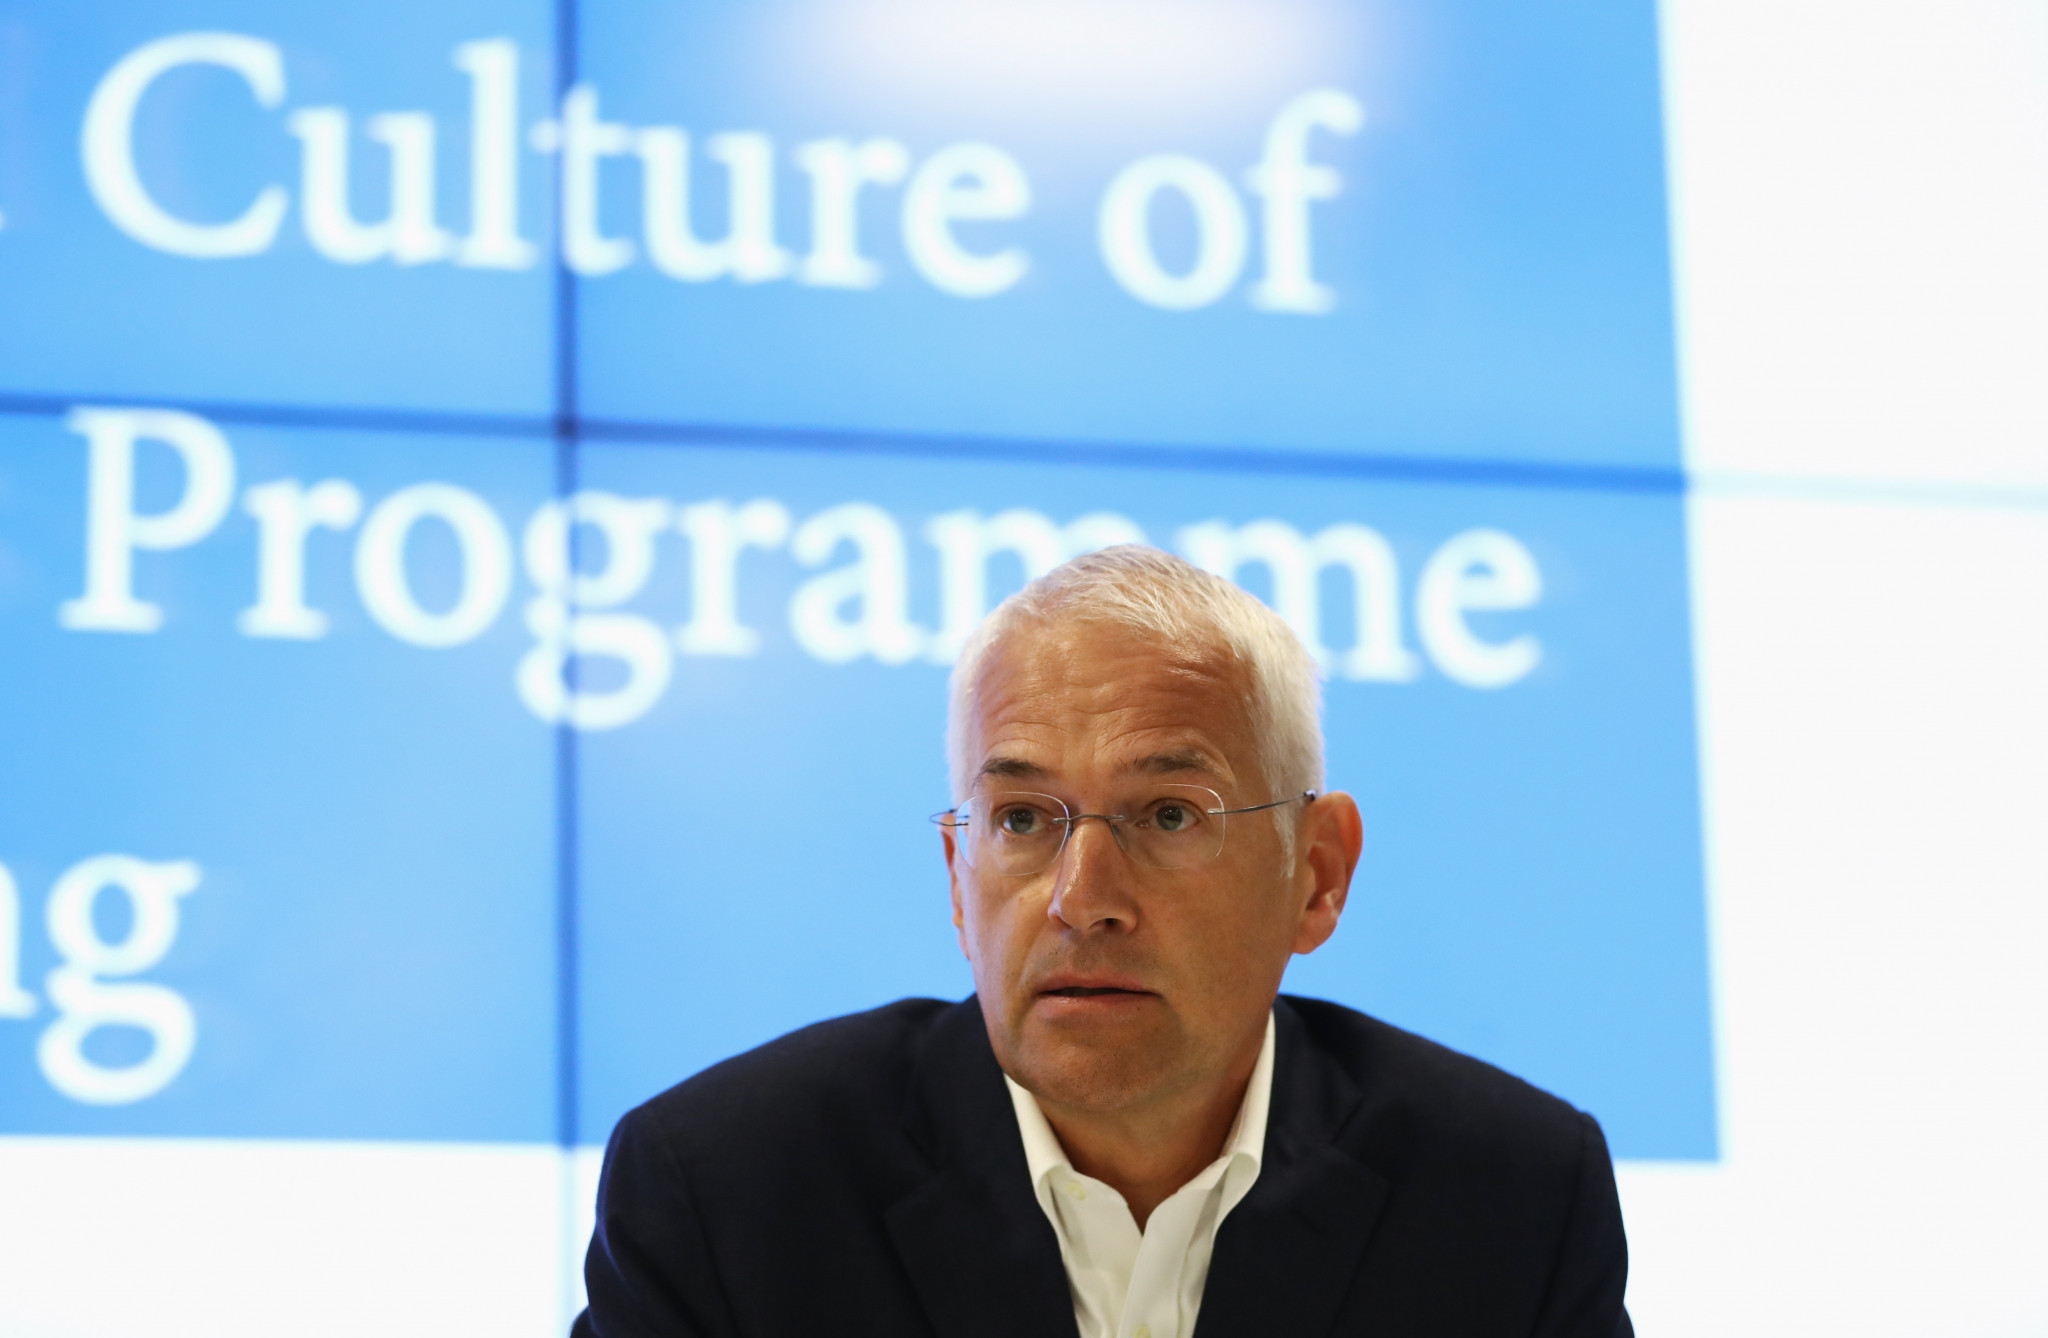 Browning resigns from Birmingham 2022 Board due to "lack of transparency"